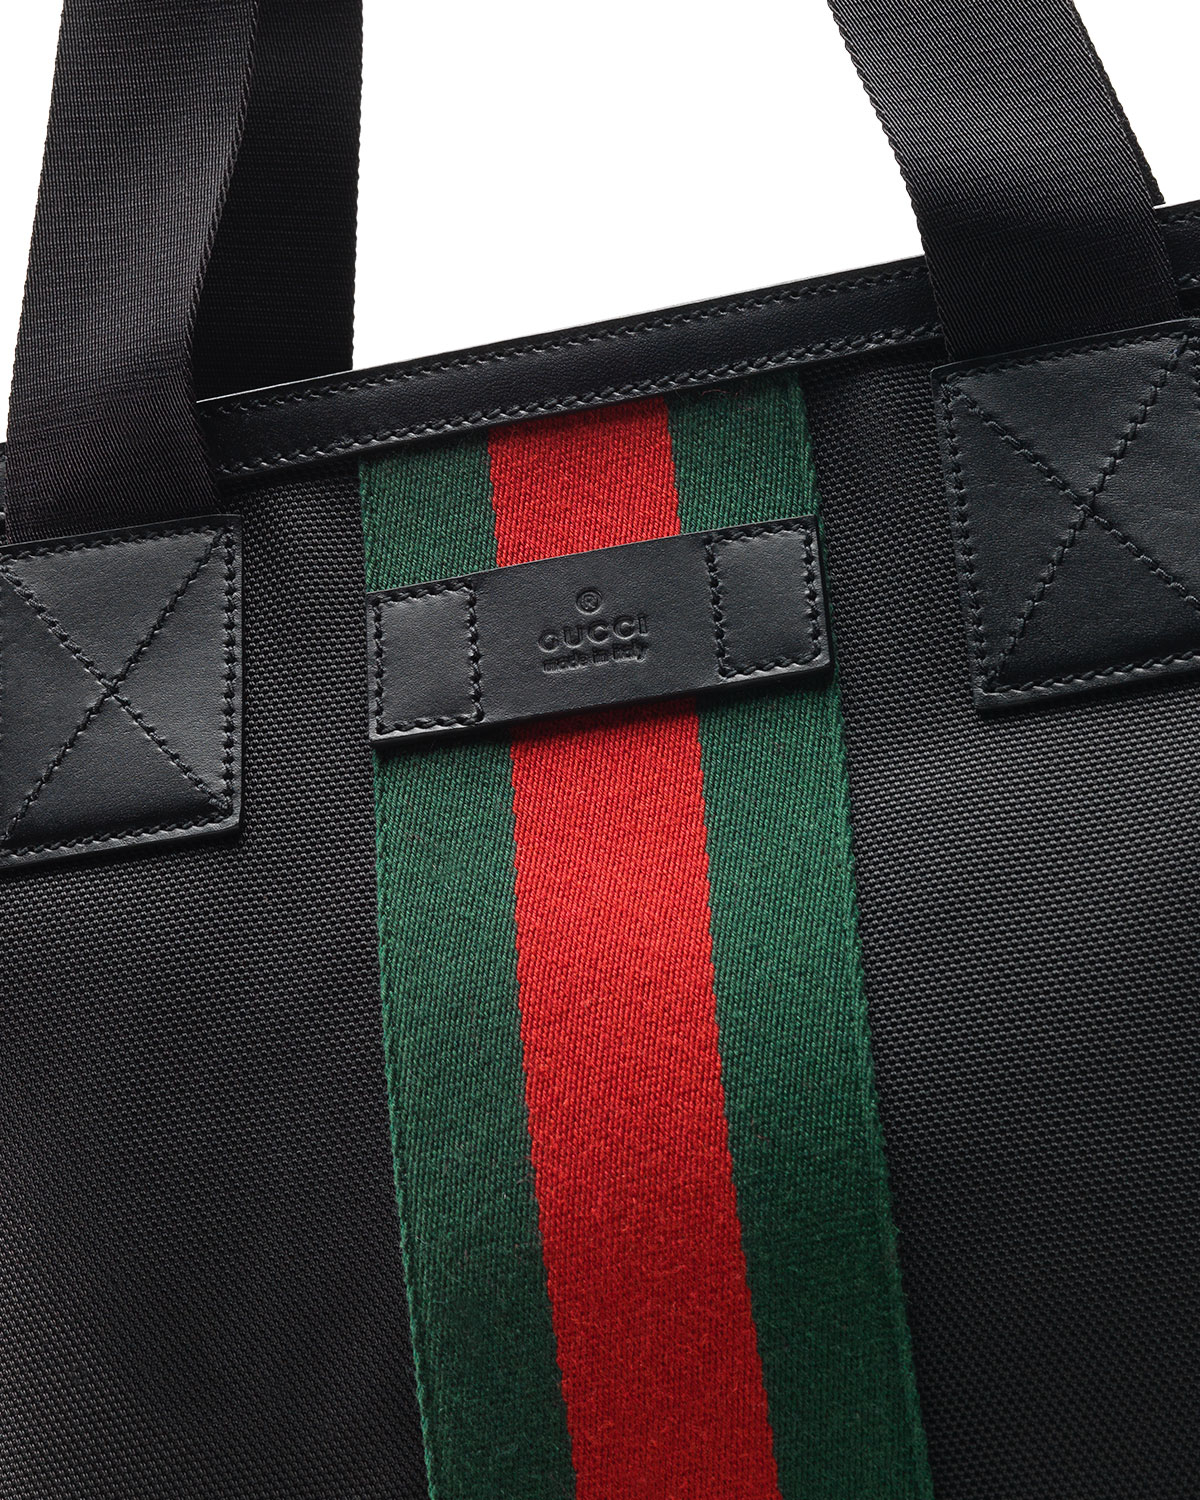 Lyst - Gucci Web Band Canvas Tote in Black for Men